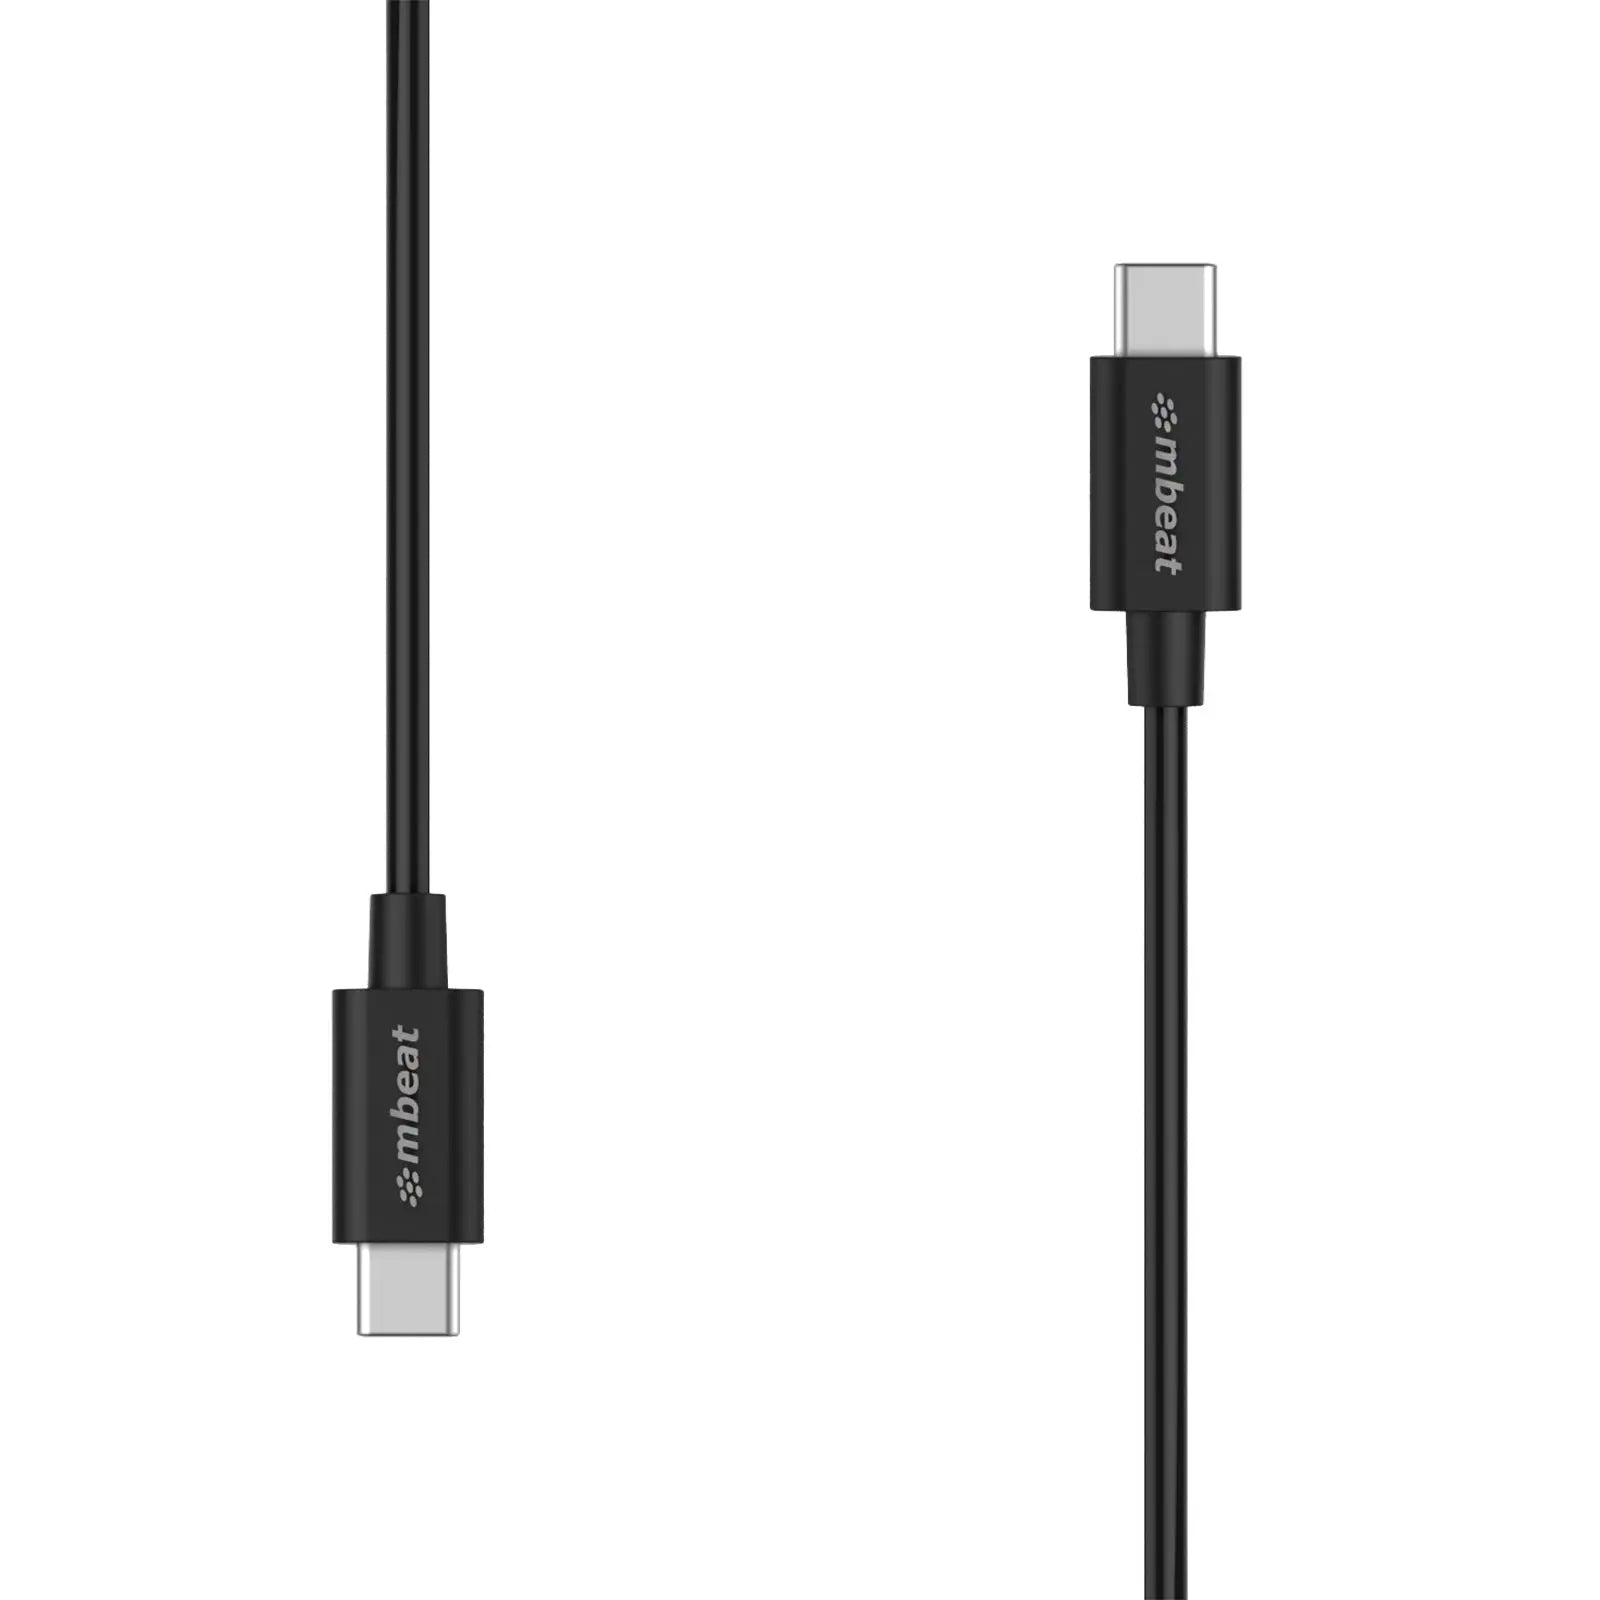 MBEAT Prime 2m USB-C to USB-C 2.0 Charge And Sync Cable High Quality/Fast Charge for Mobile Phone Device Samsung Galaxy Note 8 S8 9 Plus LG Huawei MBEAT